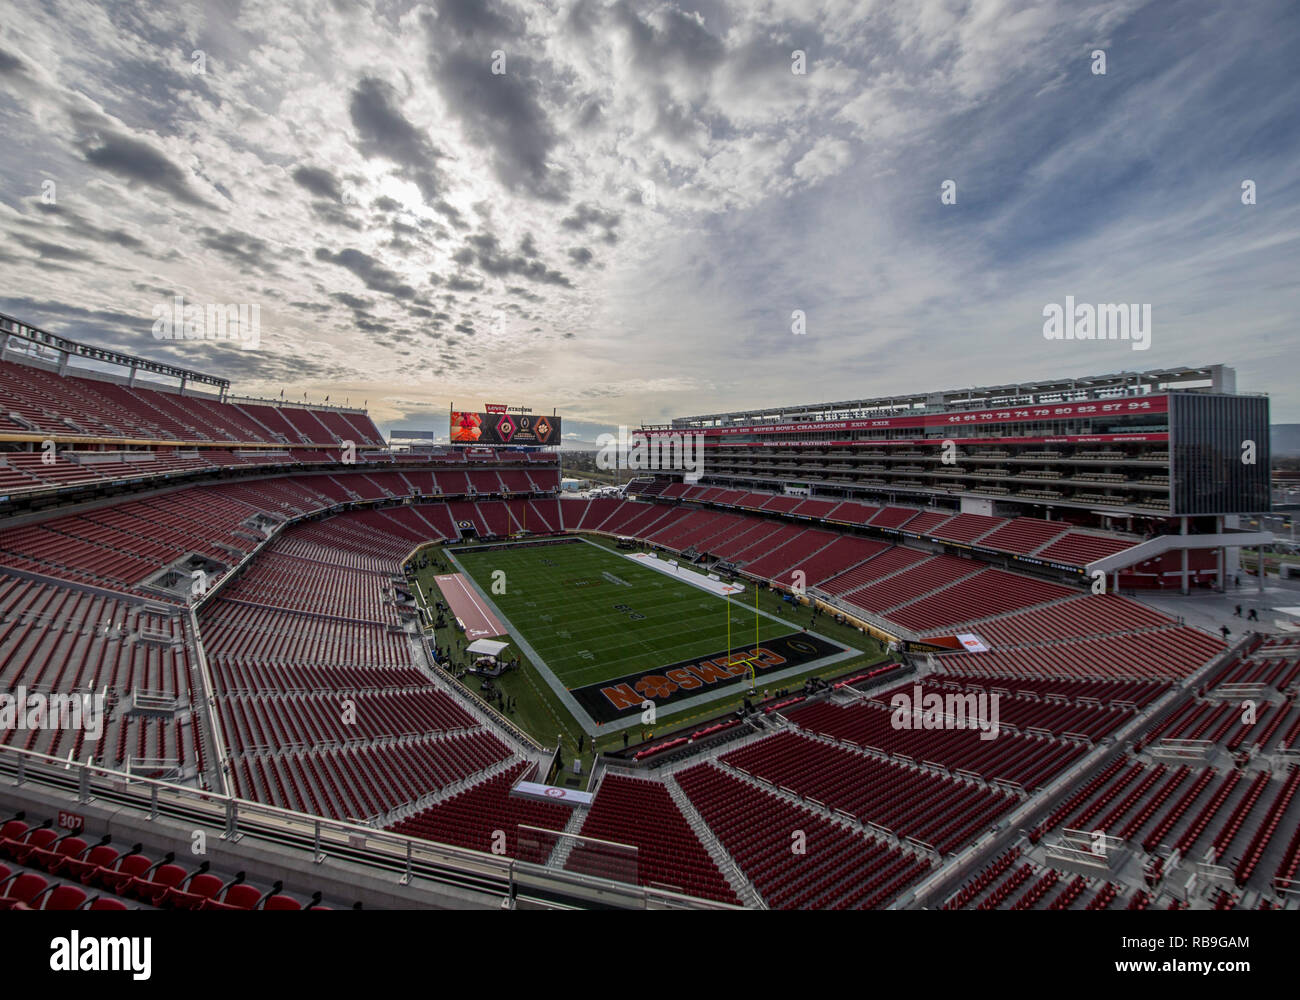 January 07, 2019: A general view of stadium prior to College Football Playoff National Championship game action between the Clemson Tigers and Alabama Crimson Tide at Levi's Stadium in Santa Clara, California. John Mersits/CSM Stock Photo